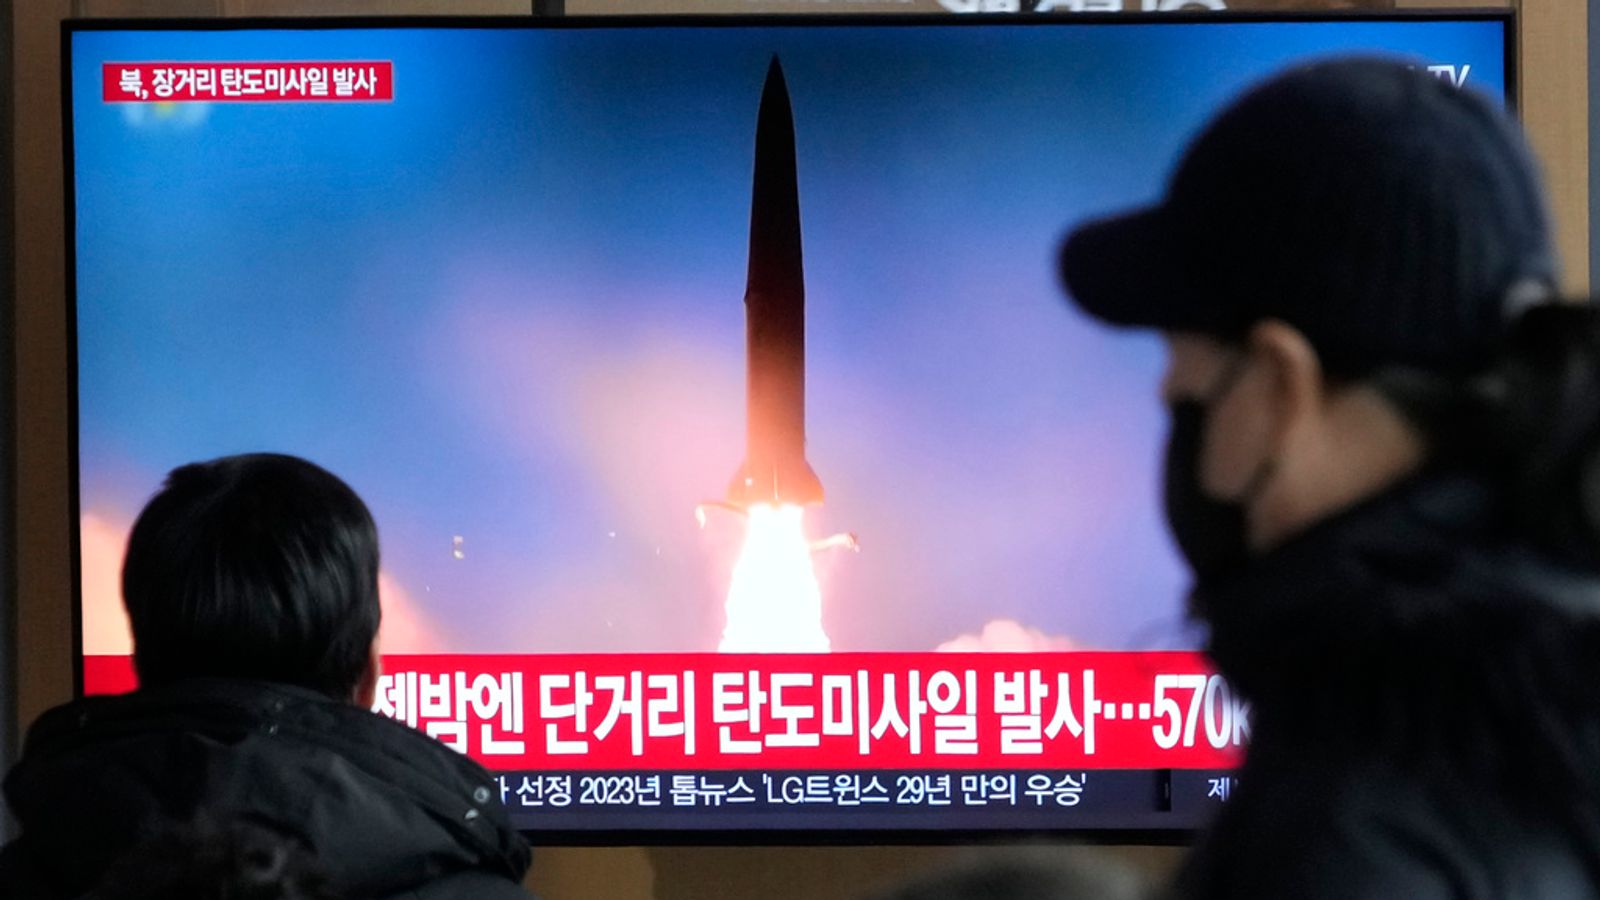 North Korea tests long-range missile which 'can reach anywhere in the US'